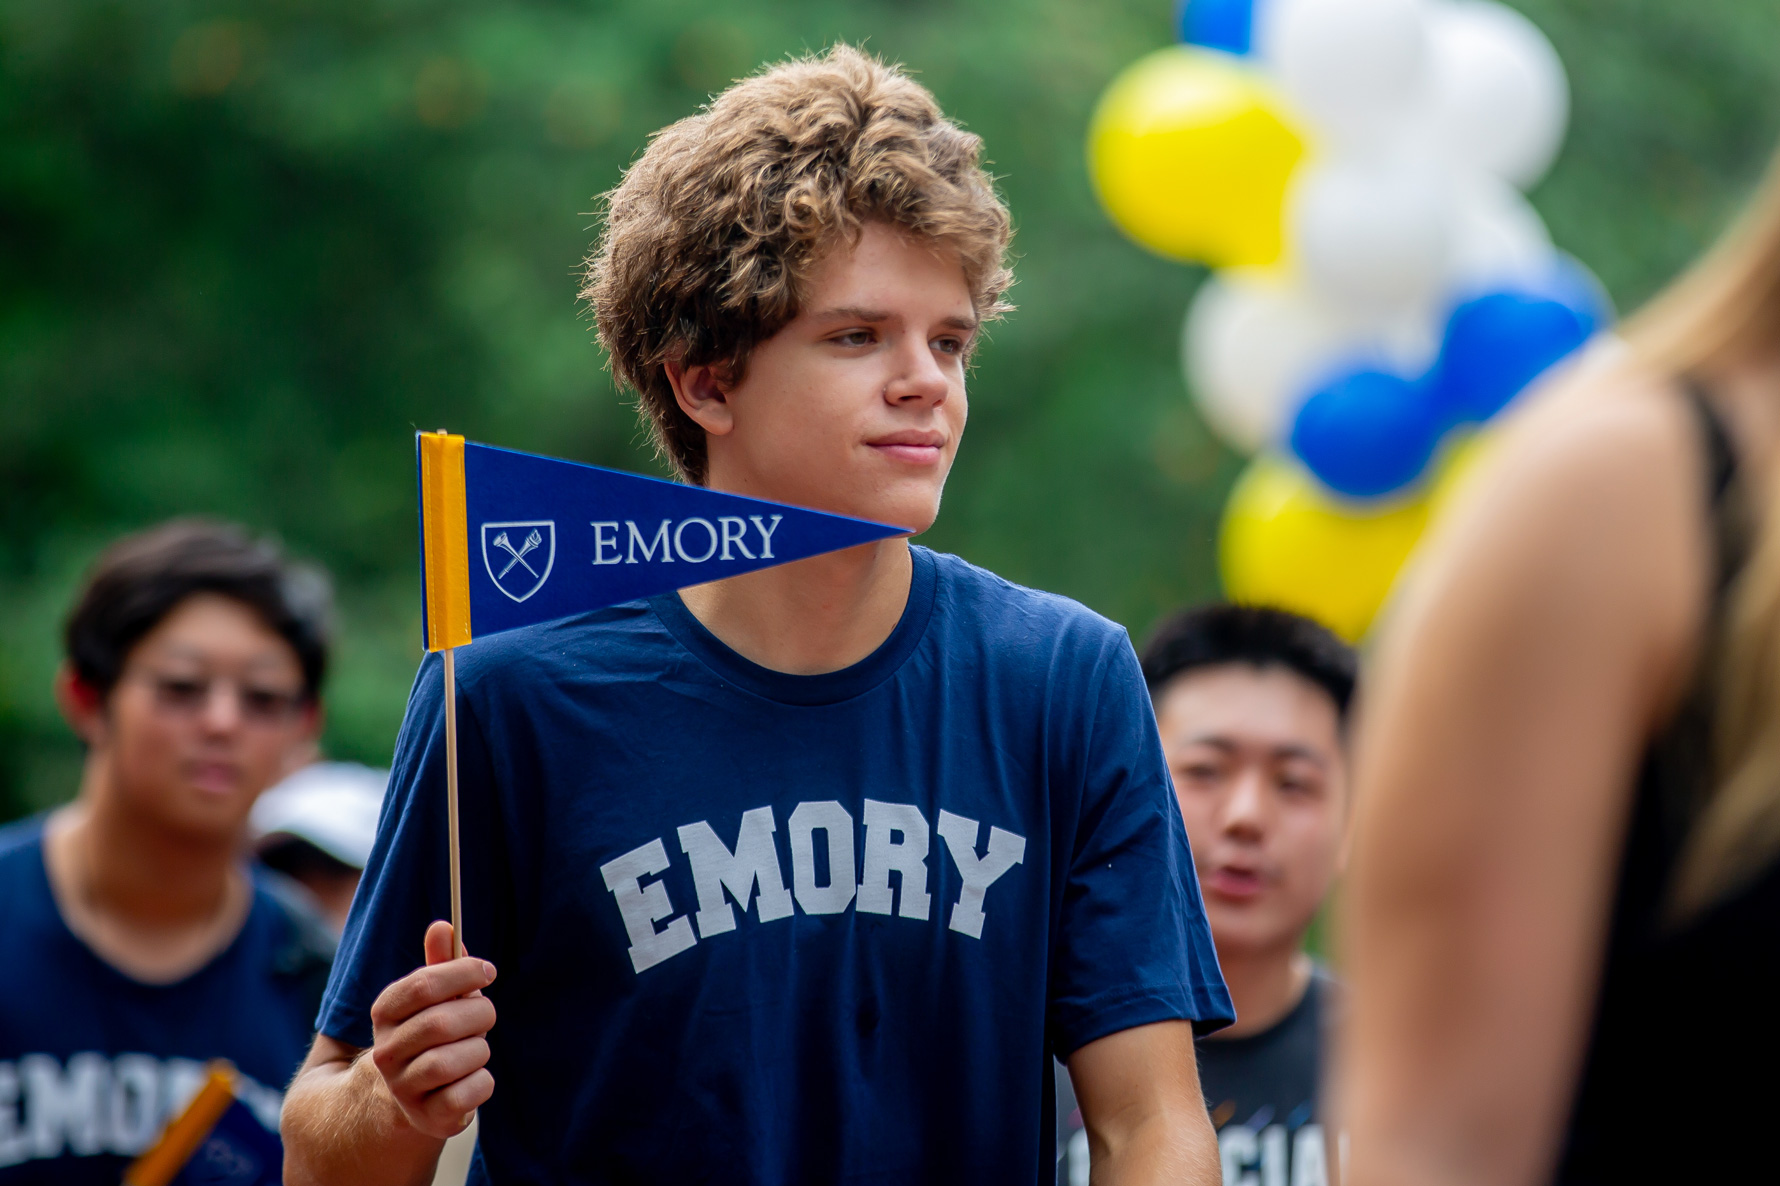 Students parading with Emory pennant